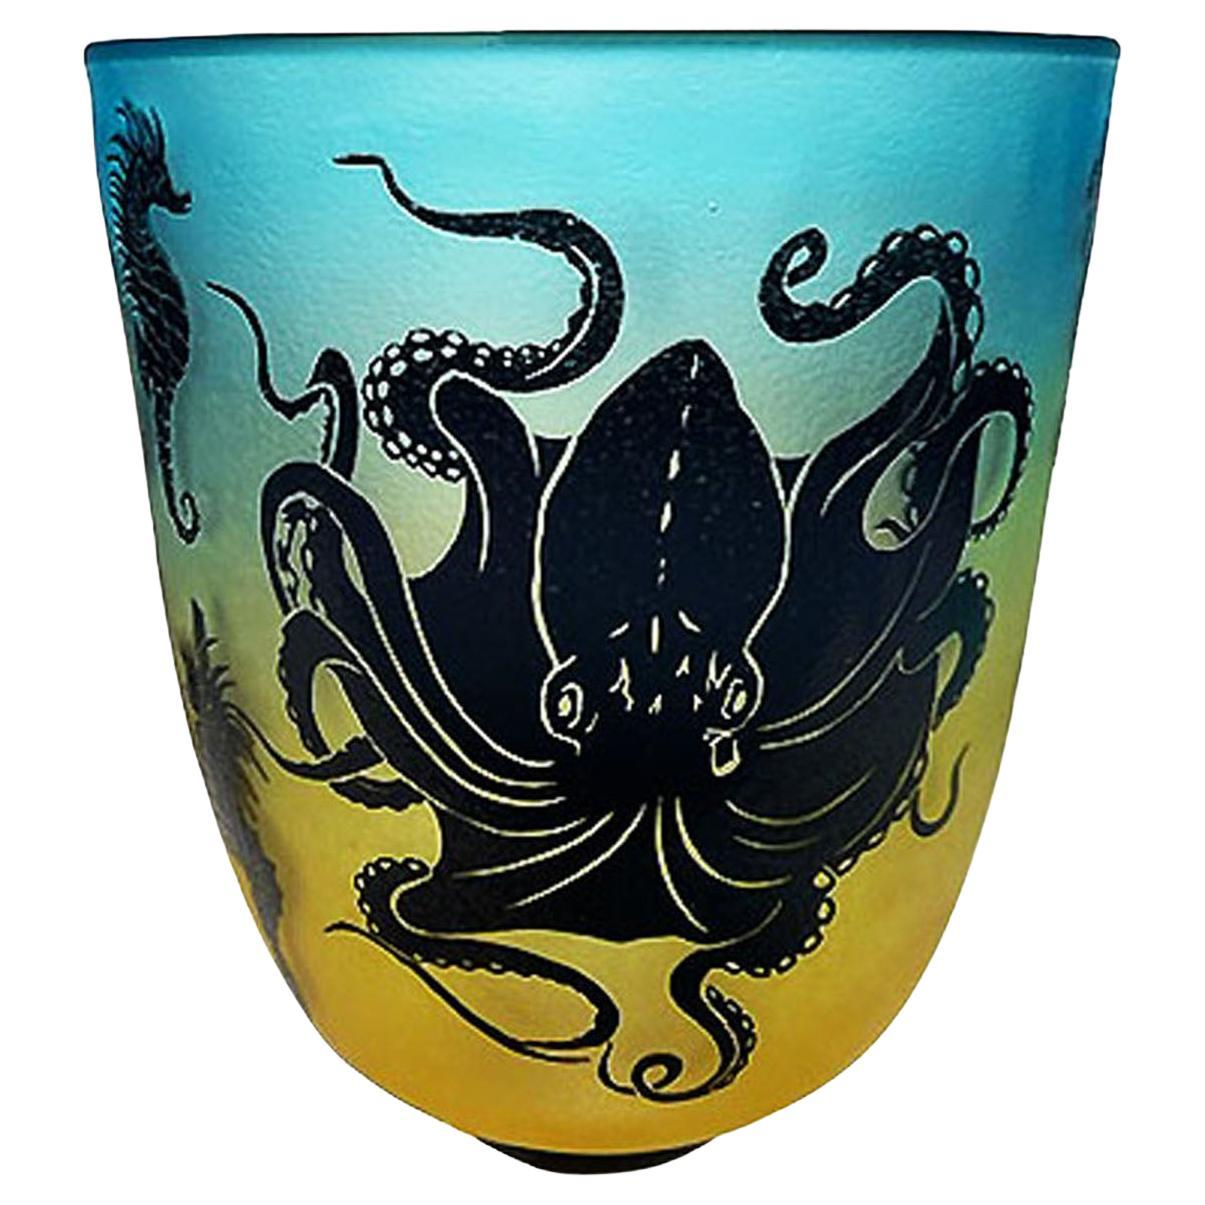 Overlay Cameo Etched Vessel with Octopus